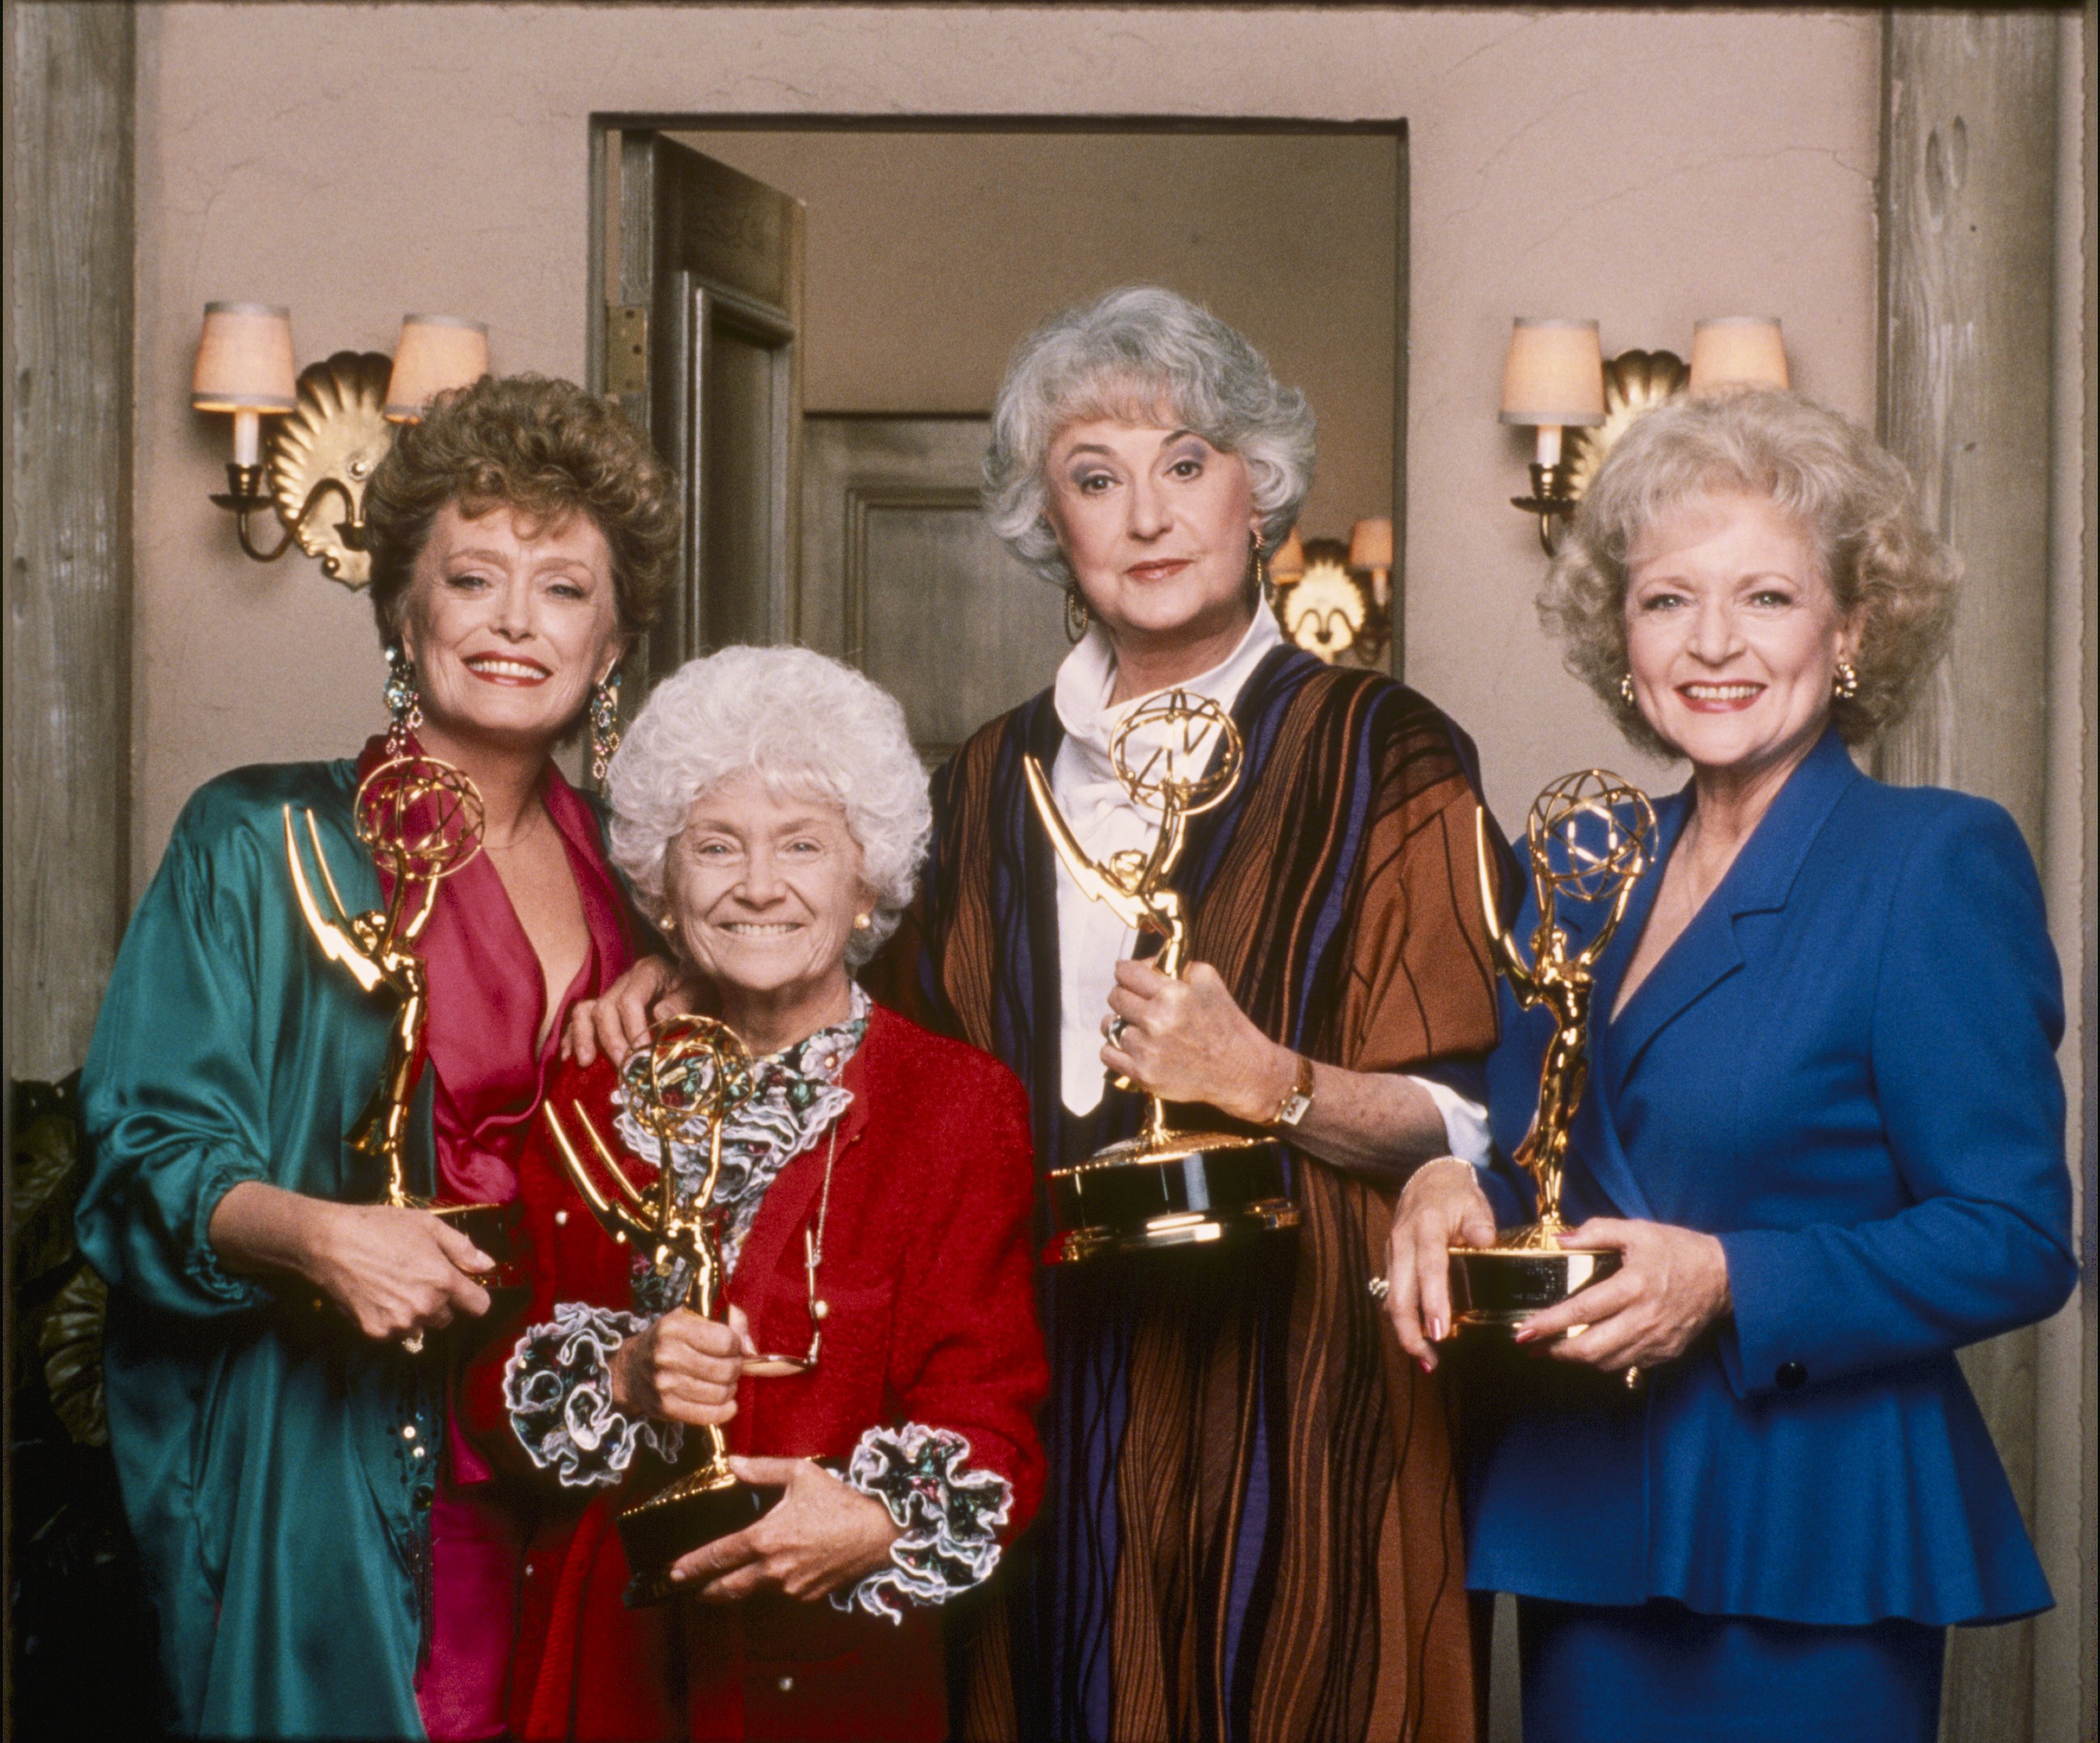 Rue McClanahan, Estelle Getty, Bea Arthur, and Betty White with their Emmys for Outstanding Lead Actress in a Comedy Series | Source: Getty Images